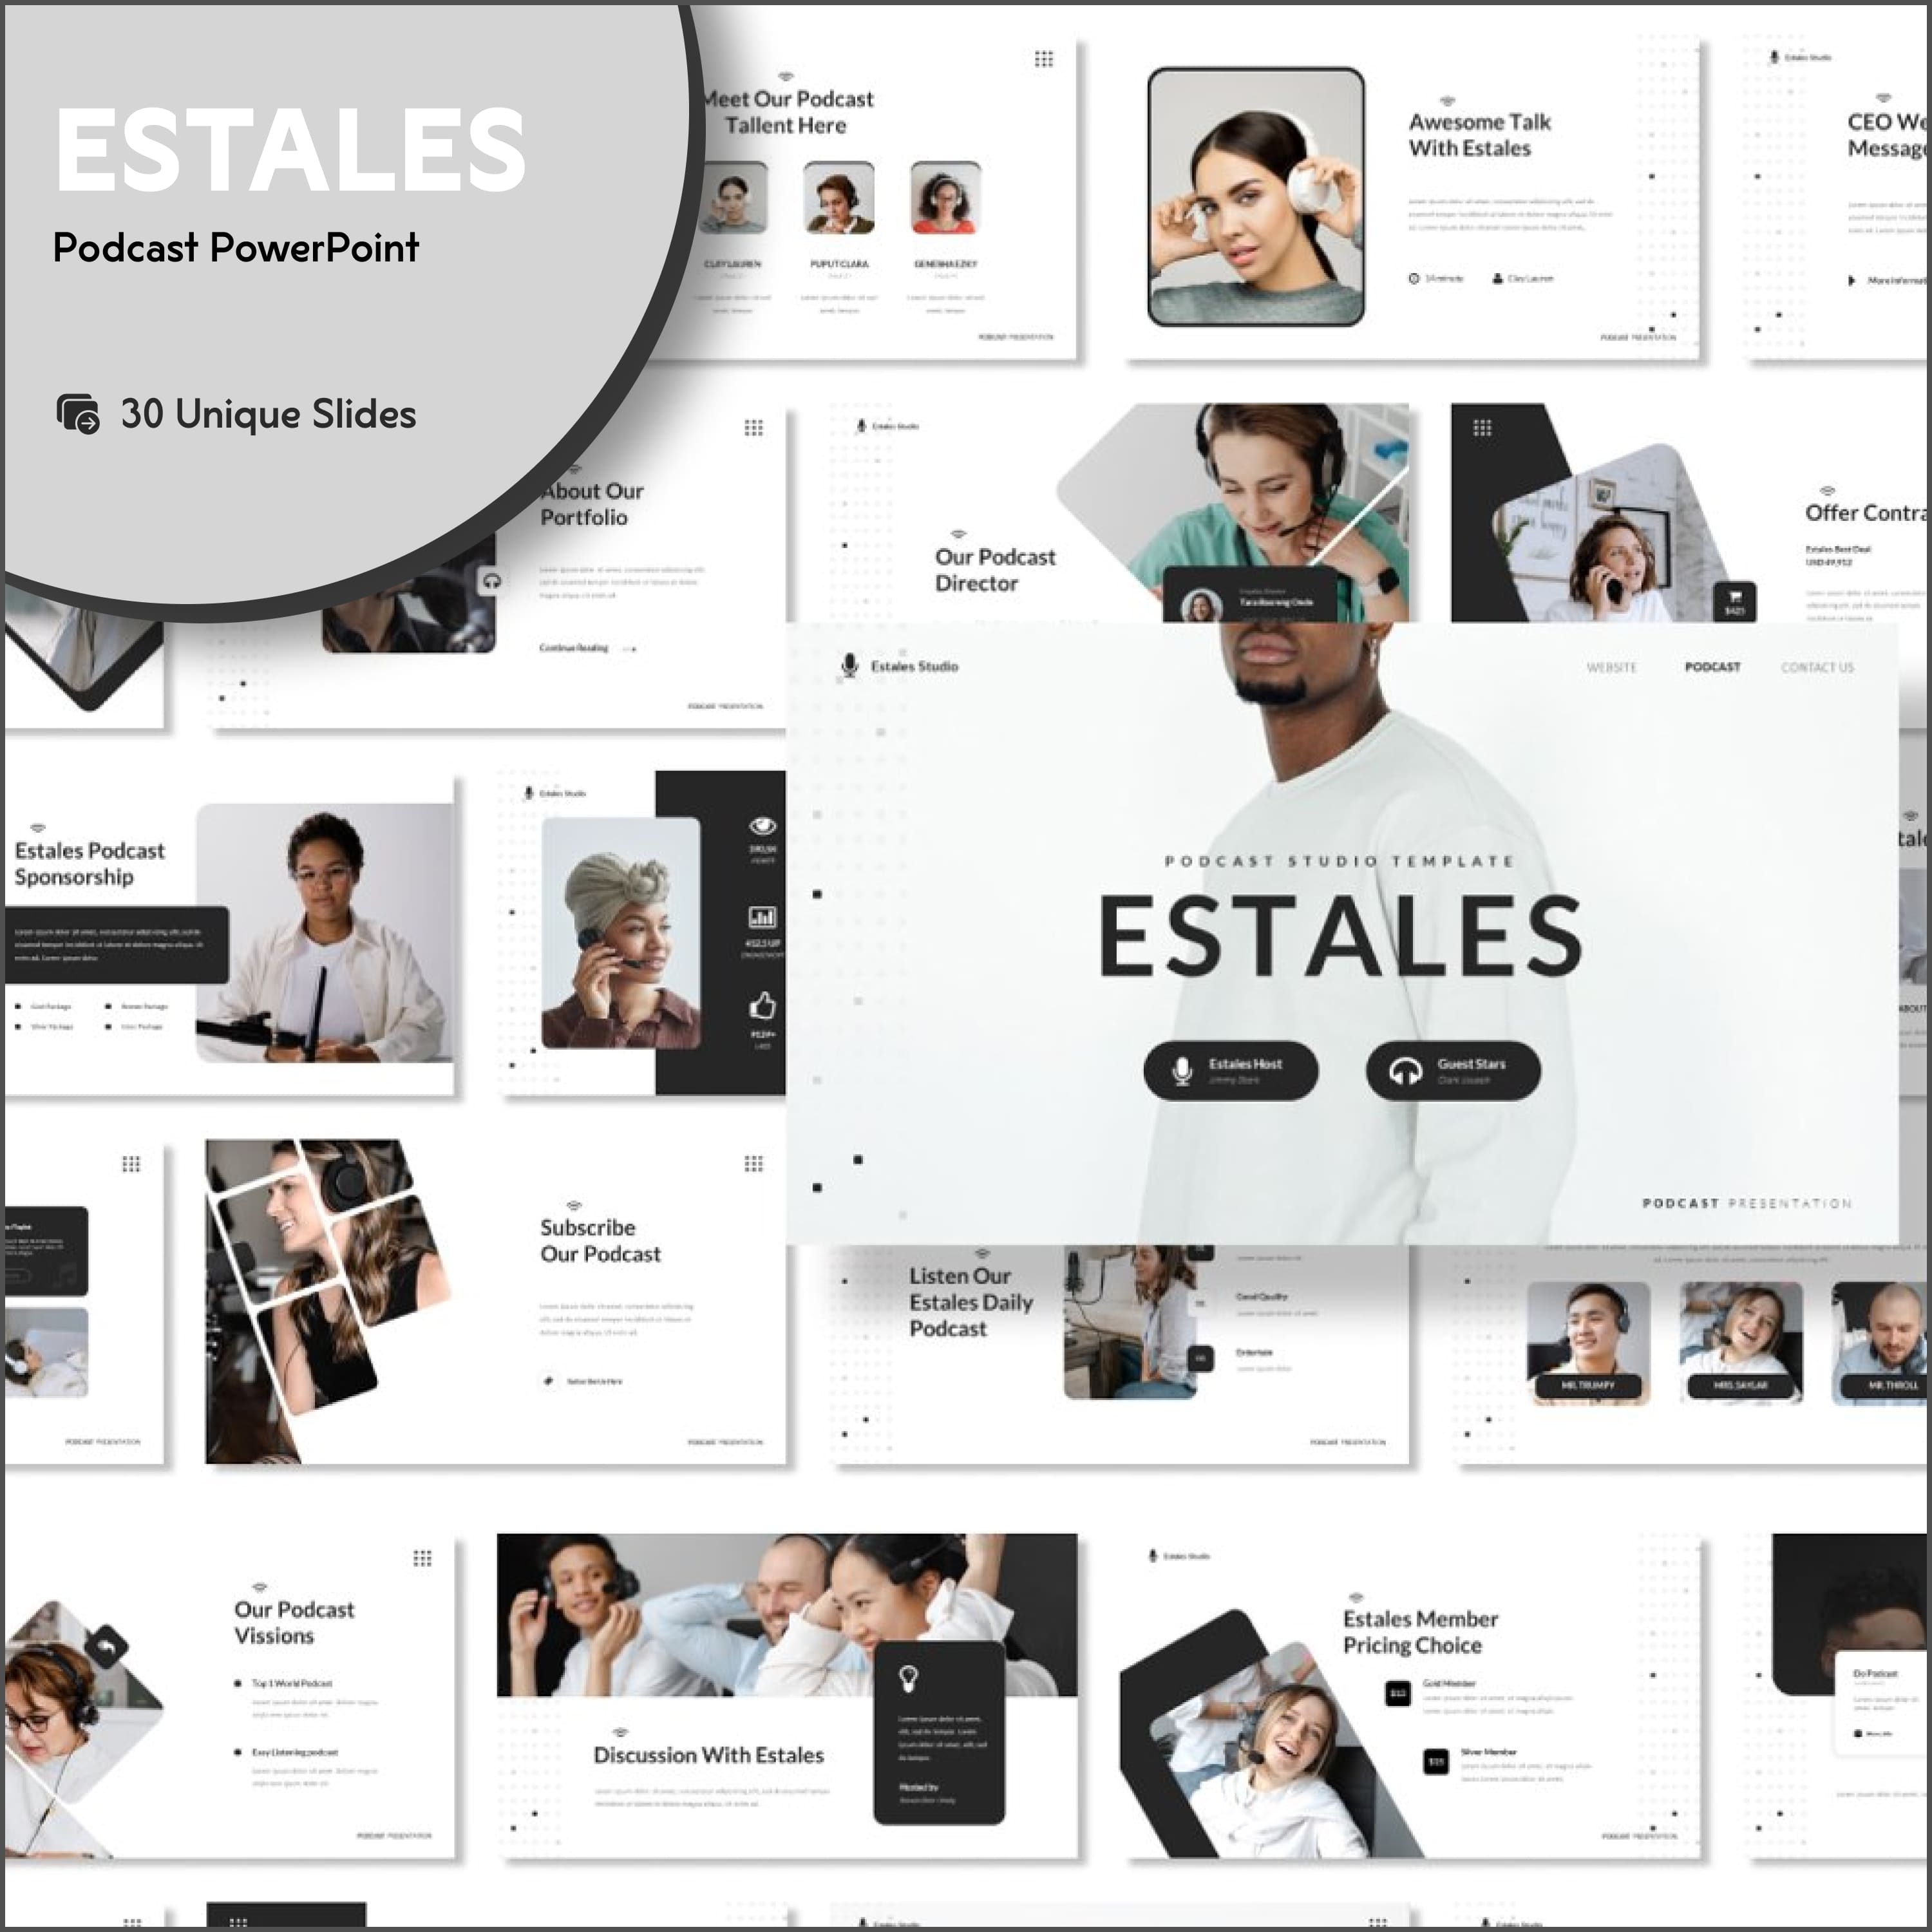 Estales - Podcast PowerPoint cover.